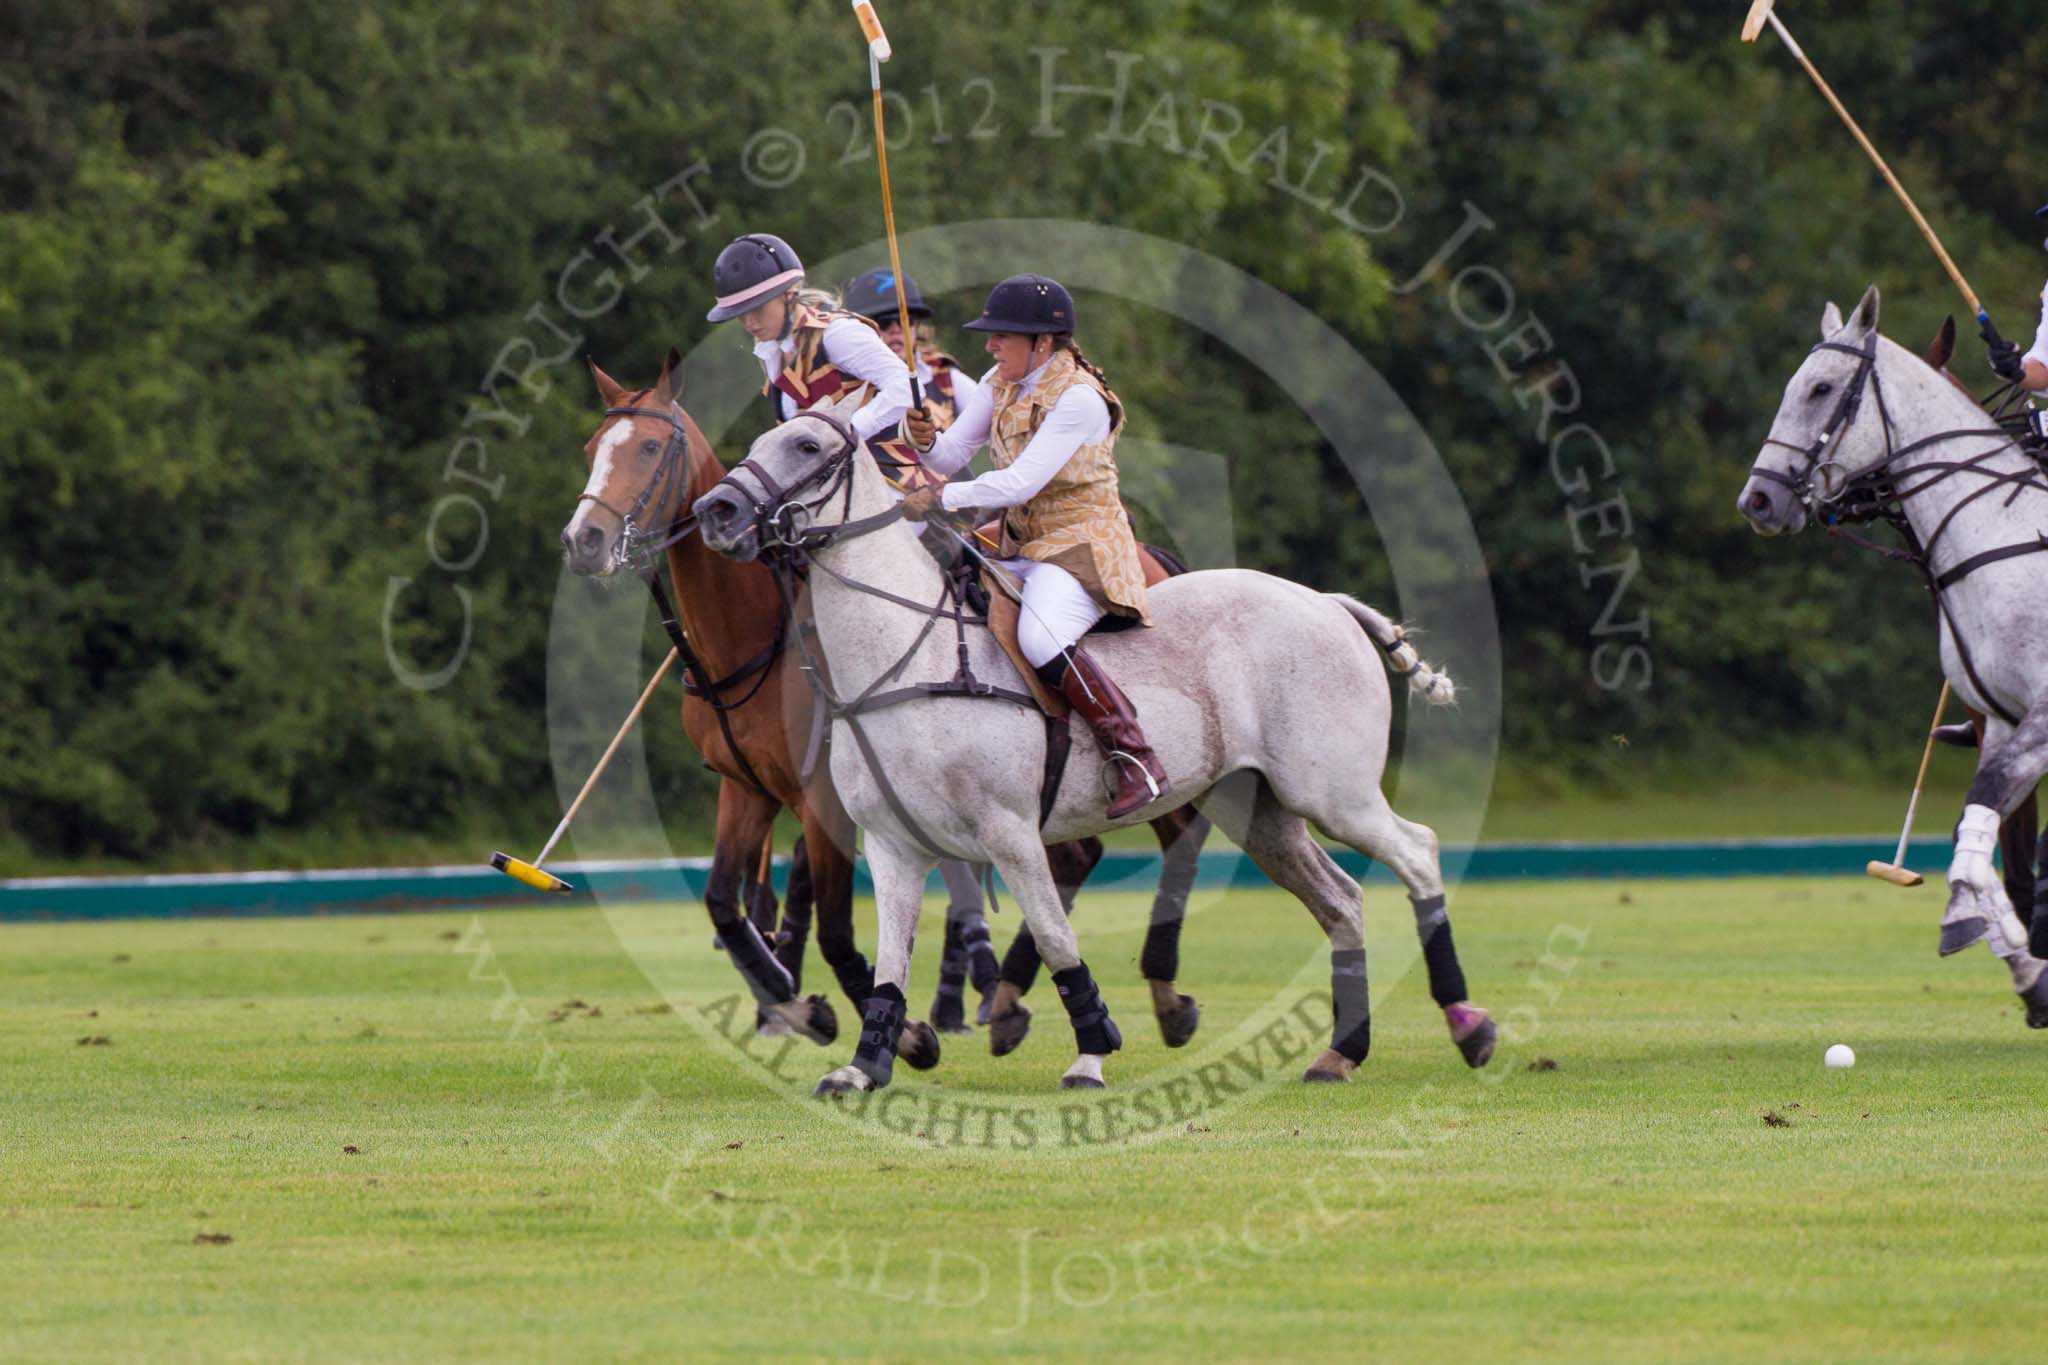 7th Heritage Polo Cup semi-finals: Ride off Charlie Howell v Barbara Patricia Zingg..
Hurtwood Park Polo Club,
Ewhurst Green,
Surrey,
United Kingdom,
on 04 August 2012 at 13:10, image #99